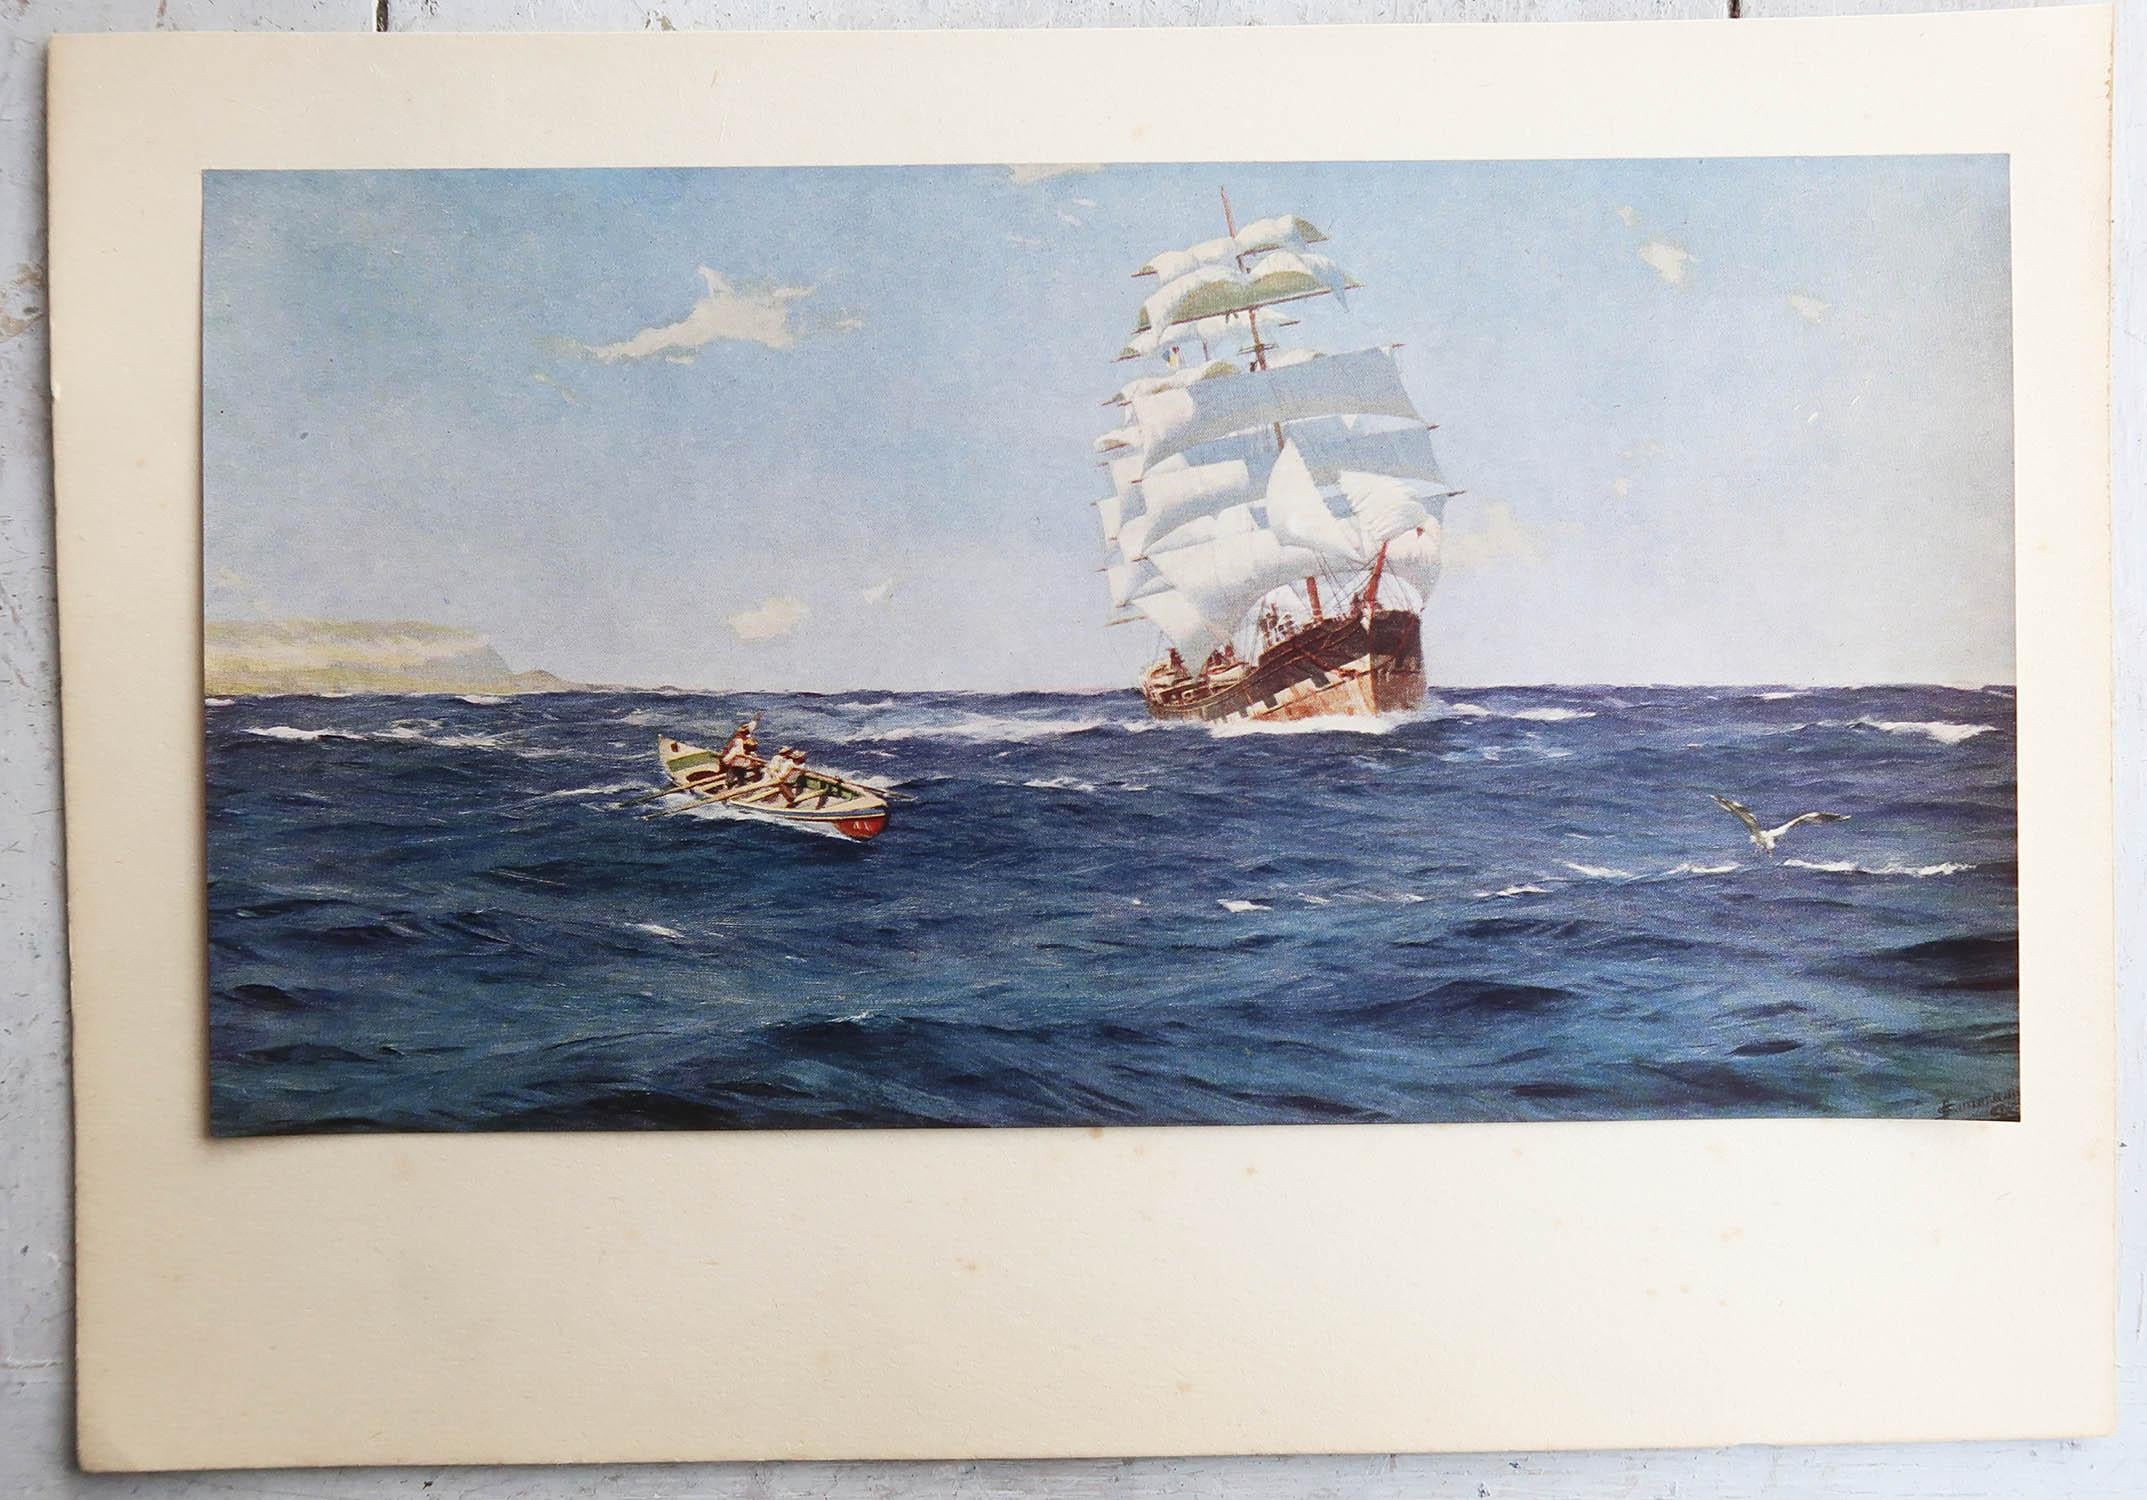 Other Original Antique Marine Print After Thomas J. Somerscales, circa 1920 For Sale